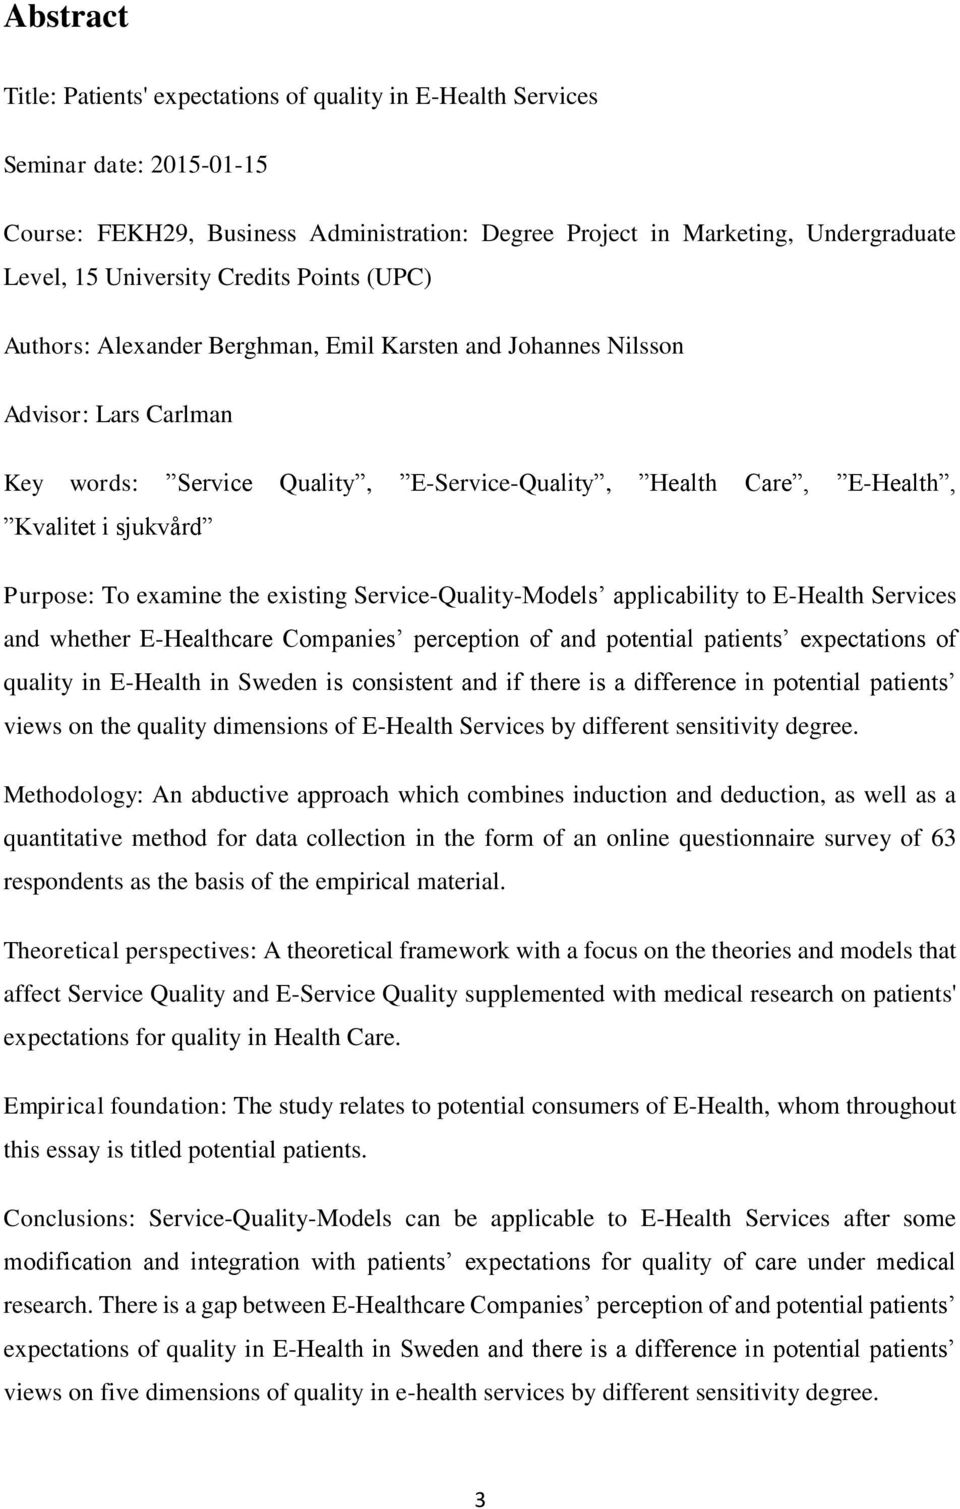 sjukvård Purpose: To examine the existing Service-Quality-Models applicability to E-Health Services and whether E-Healthcare Companies perception of and potential patients expectations of quality in